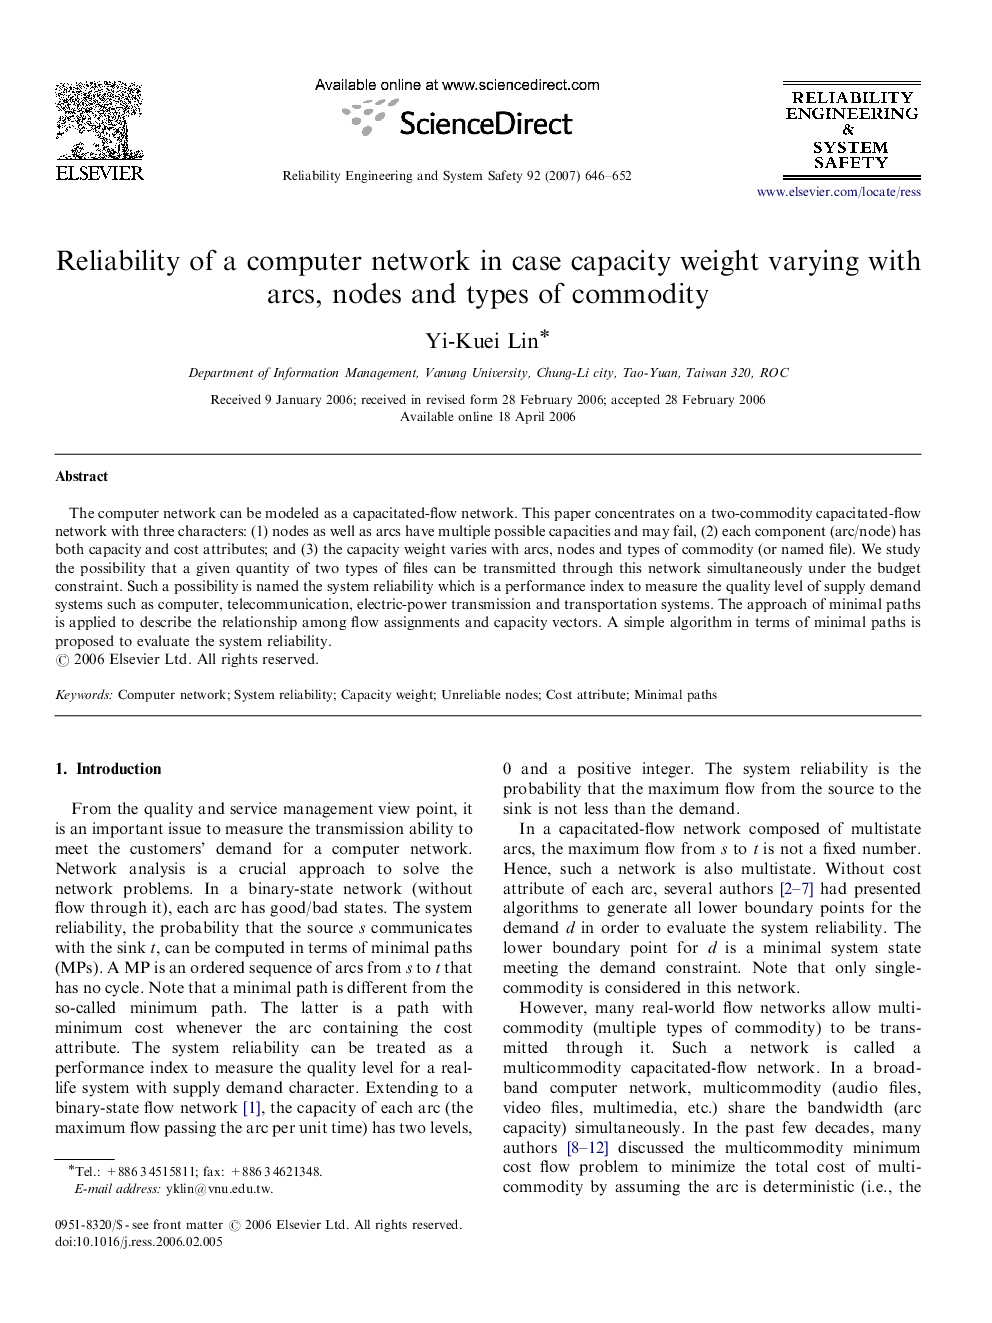 Reliability of a computer network in case capacity weight varying with arcs, nodes and types of commodity